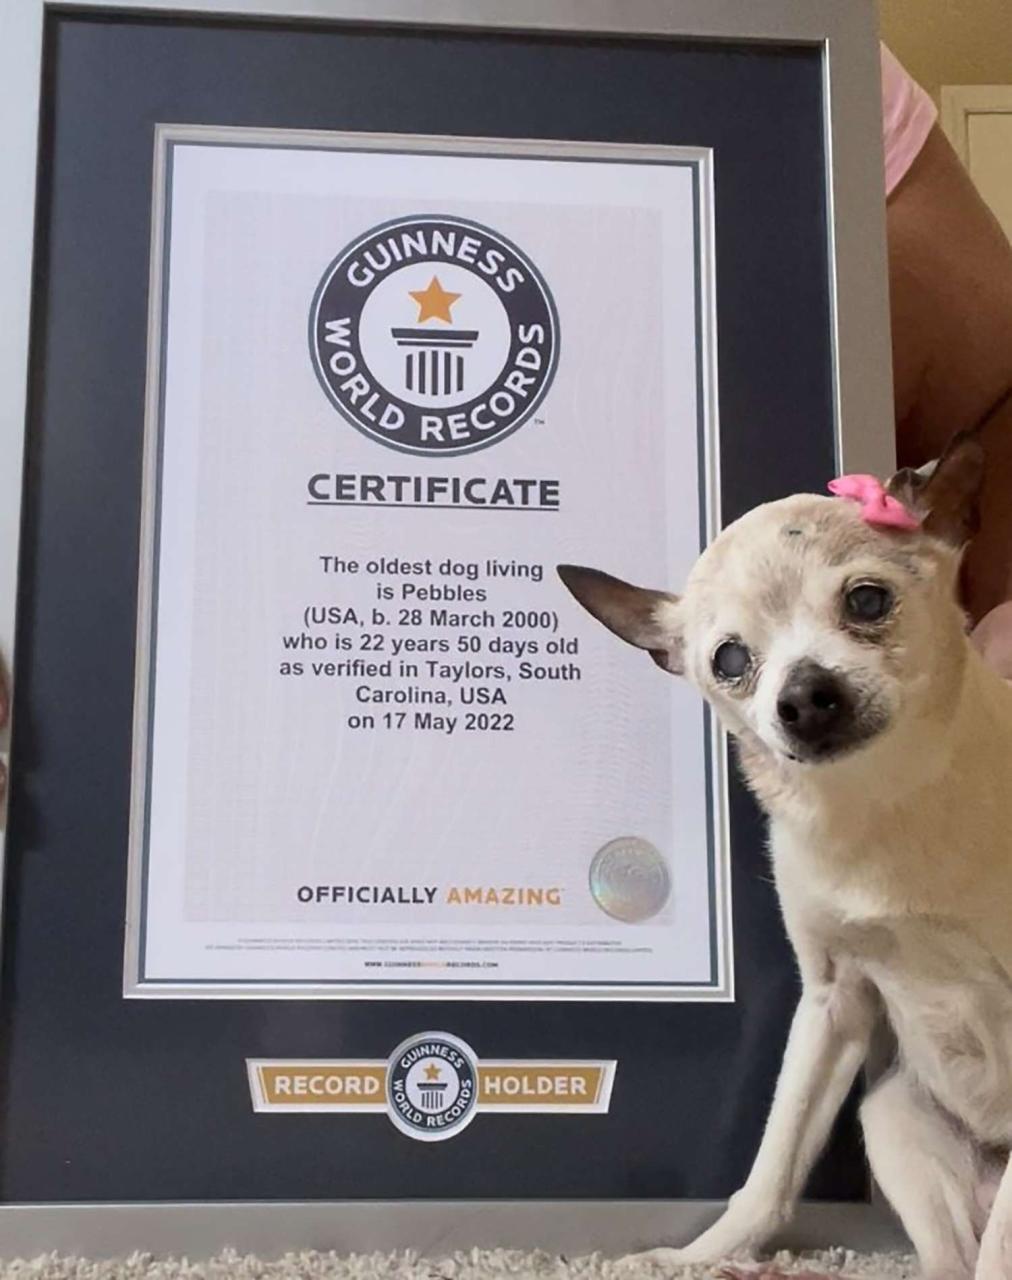 22-Year-Old Pebbles Named Oldest Living Dog By Guinness World Records